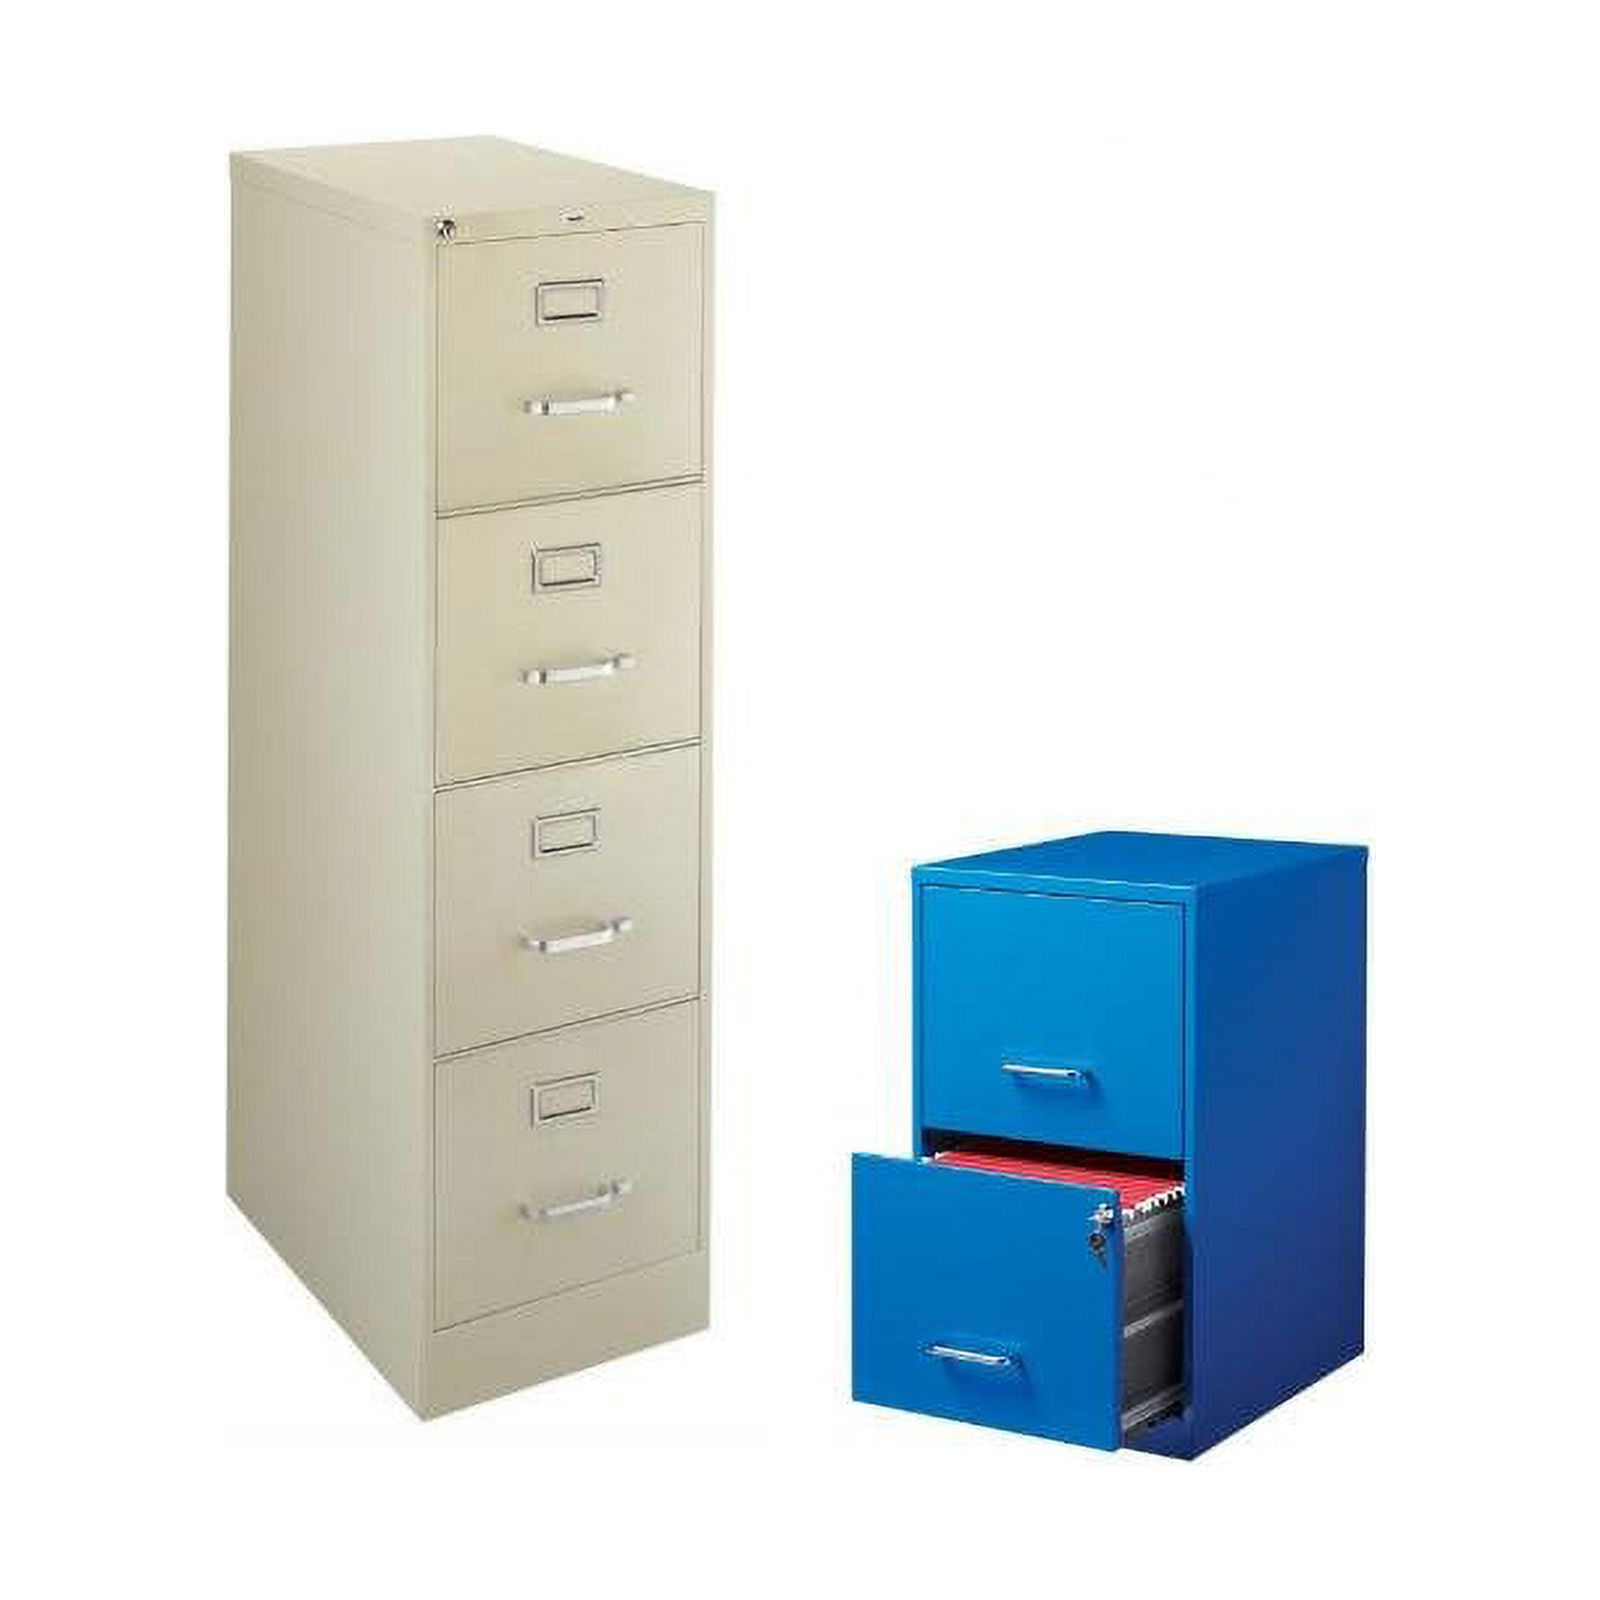 2 Piece Value Pack 4 and 2 Drawer Filing Cabinet in Putty and Blue - image 1 of 3